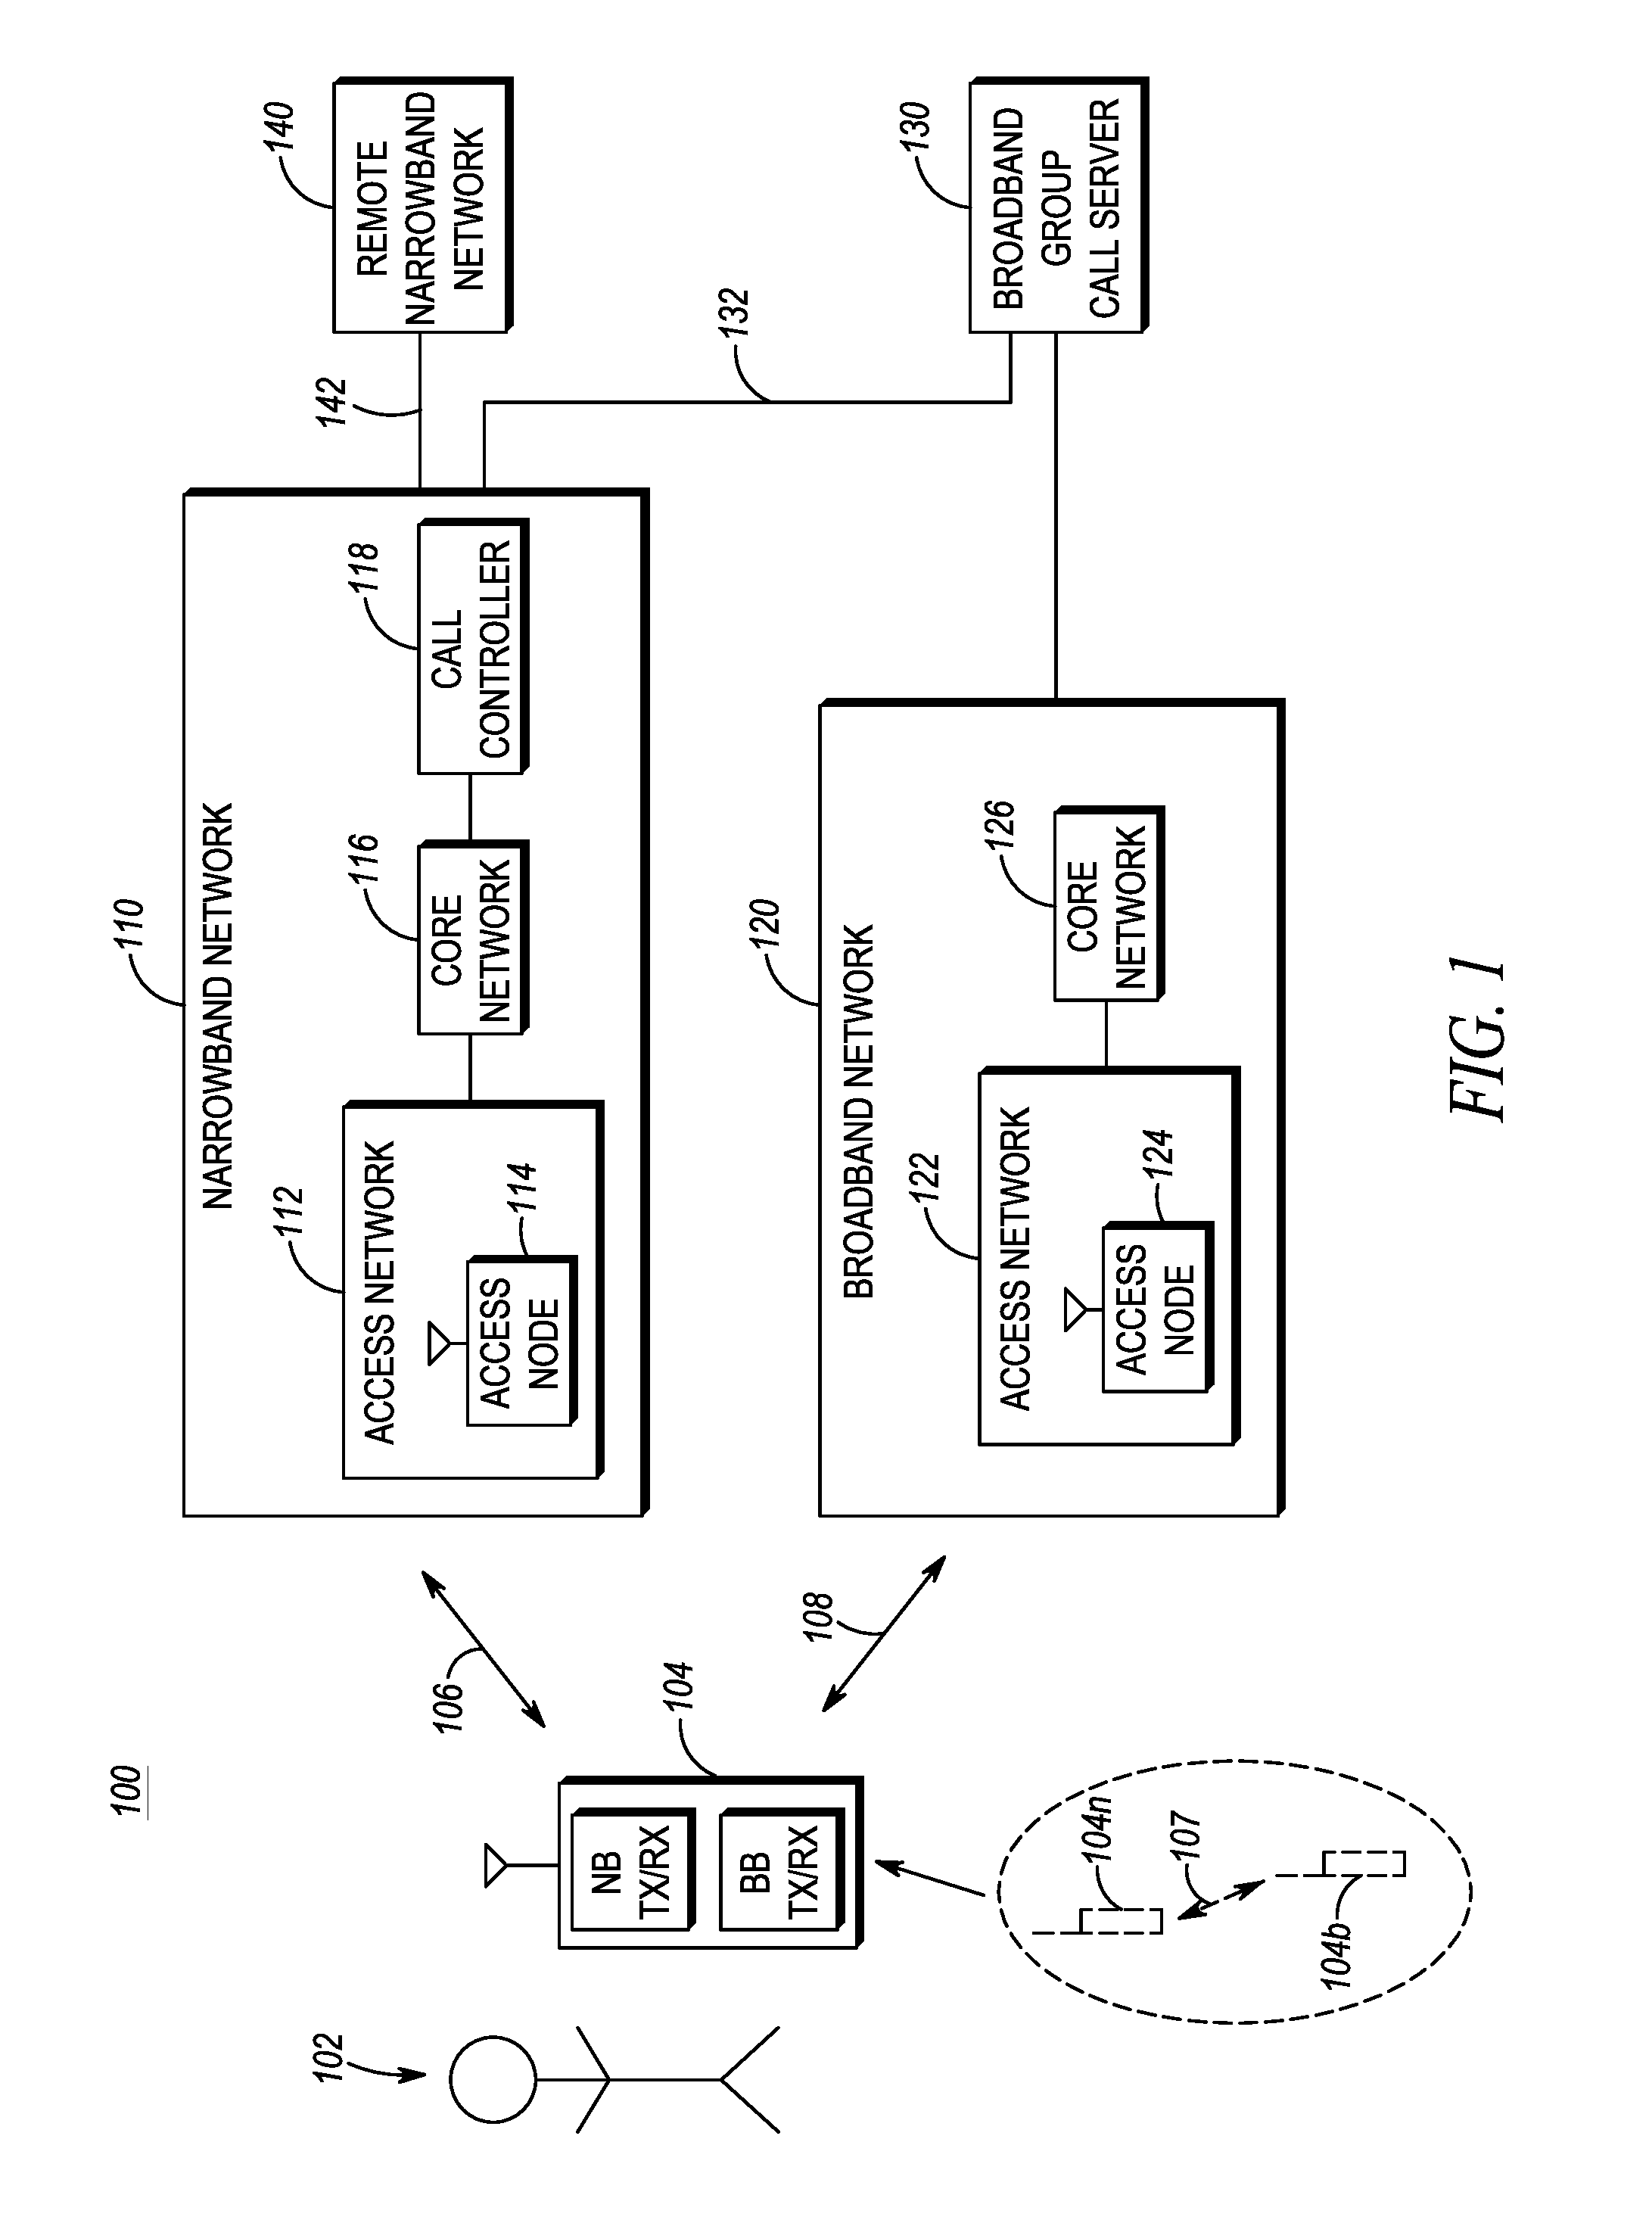 Method and apparatus for establishing a group call in a multiple wireless technology communication system